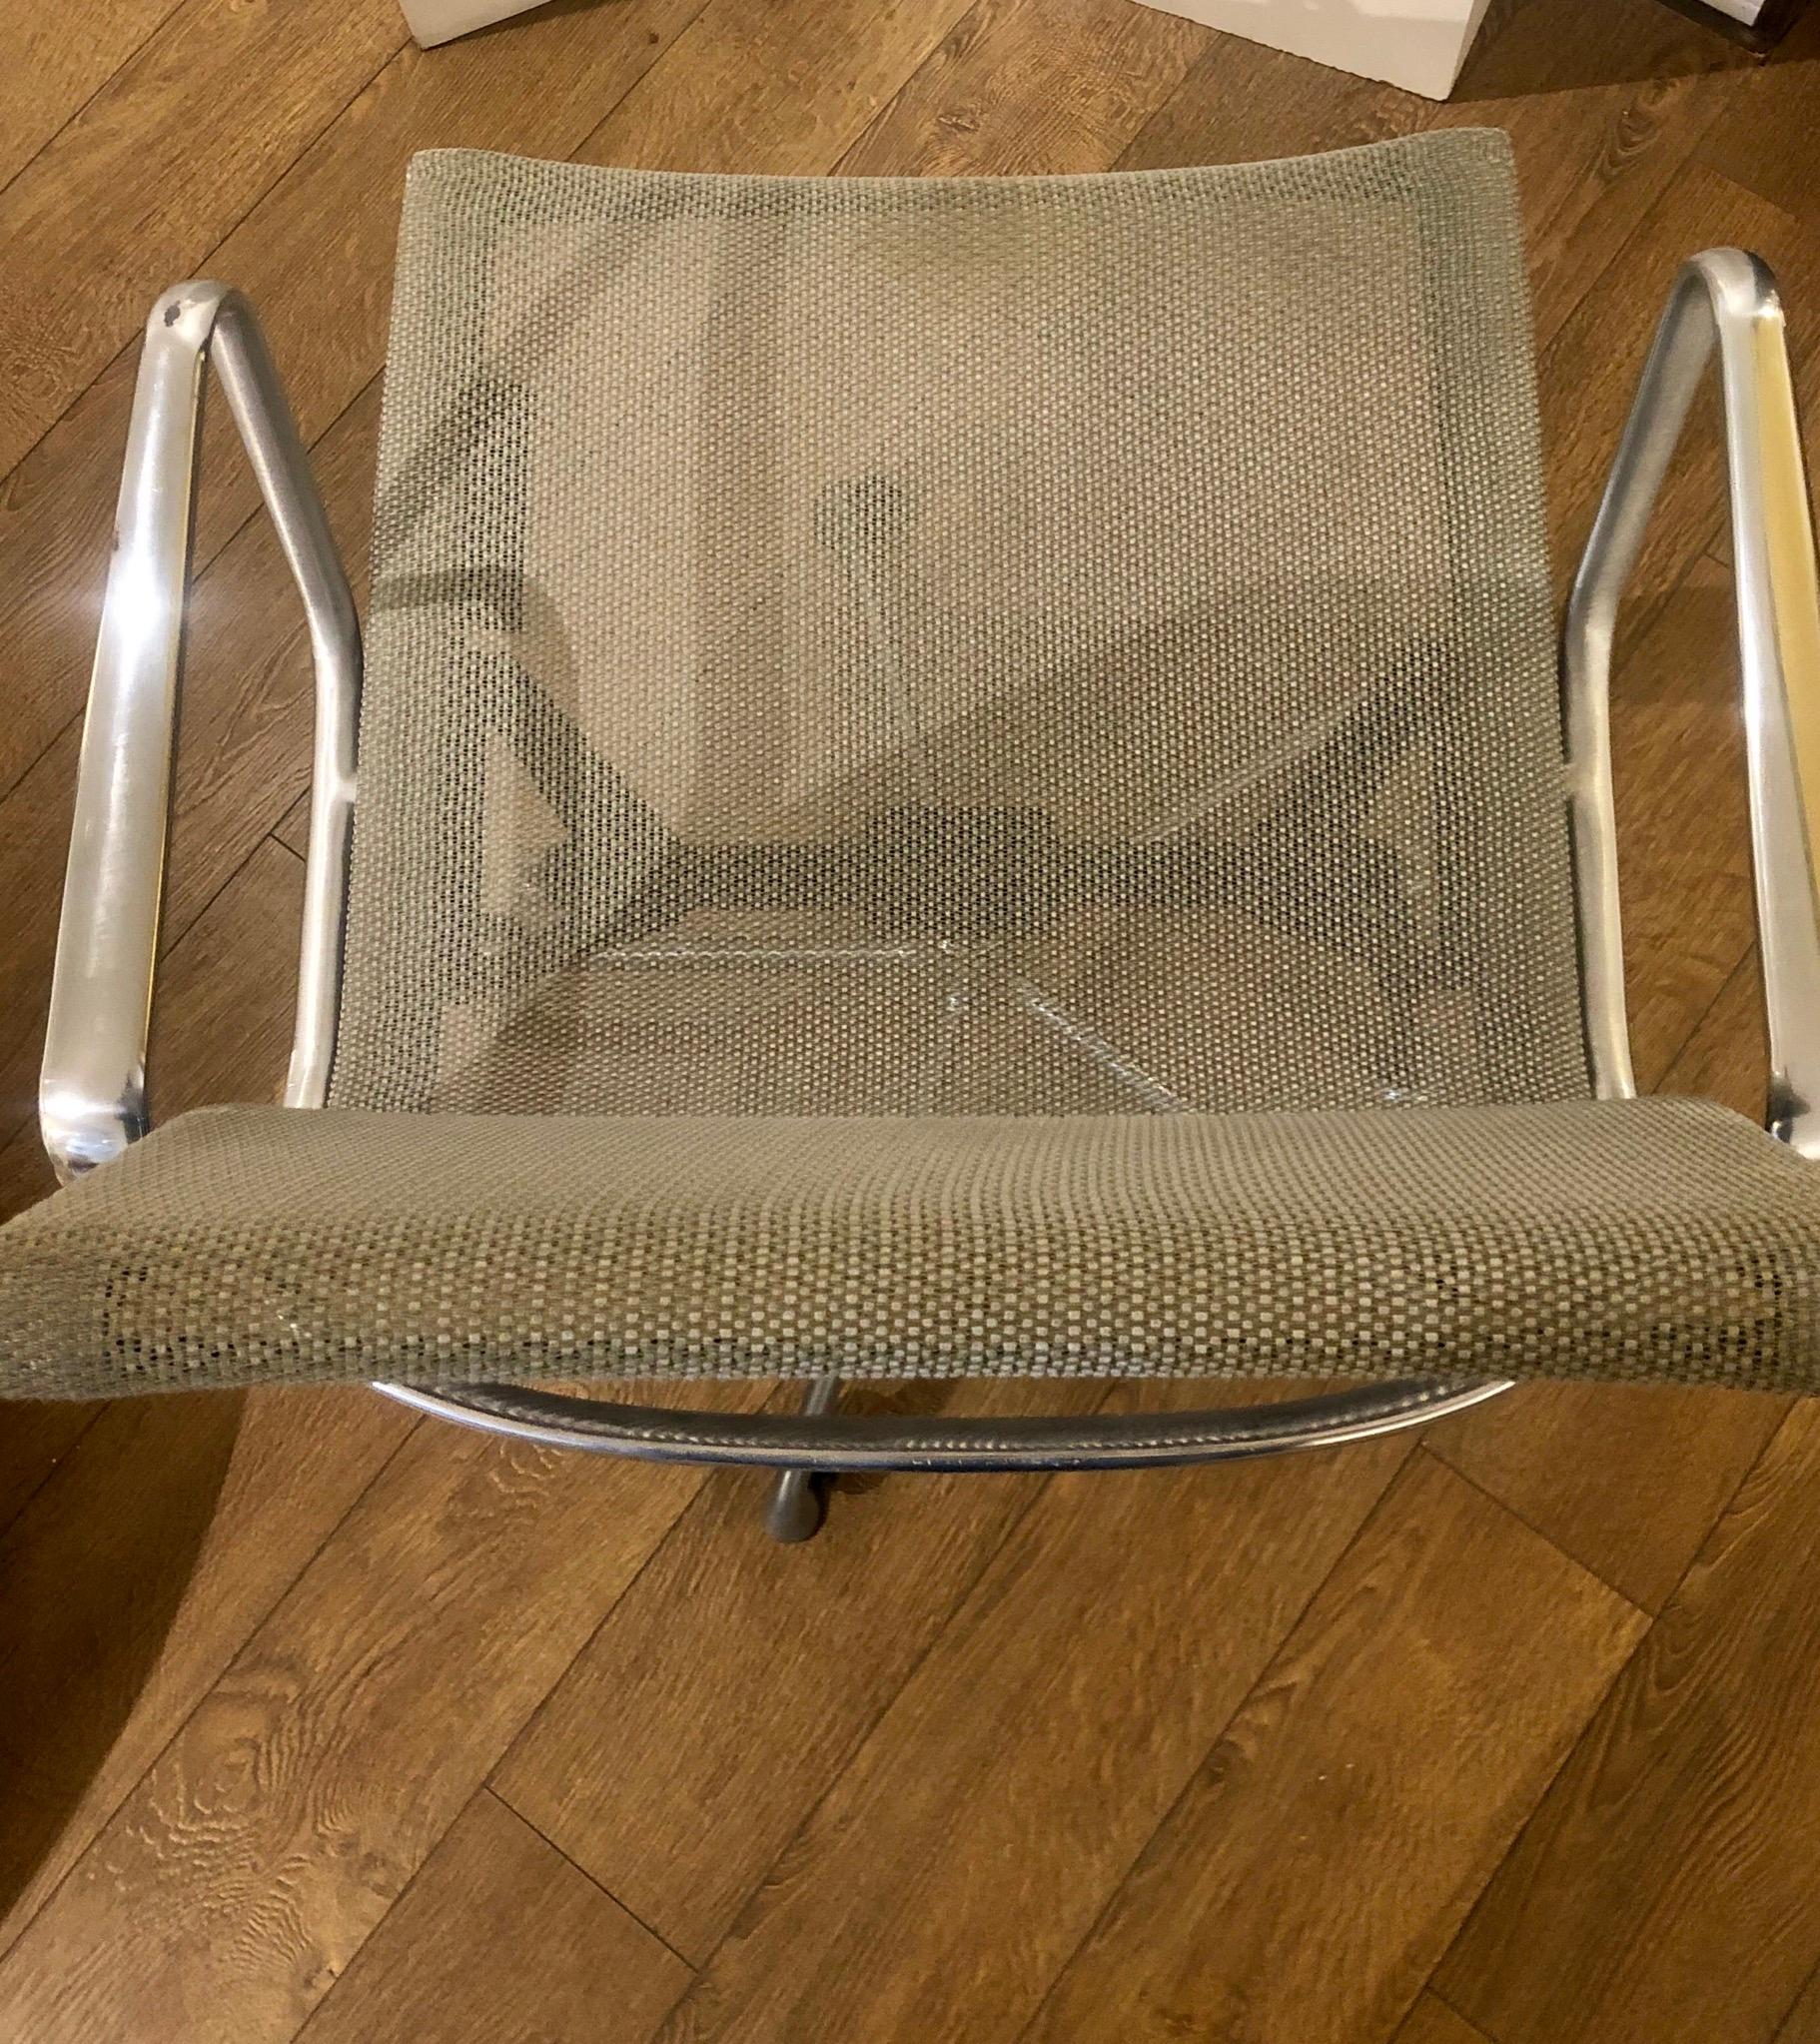 American Eames Herman Miller Aluminum Group Chair Casters 50 Year Anniversary Grey Mesh